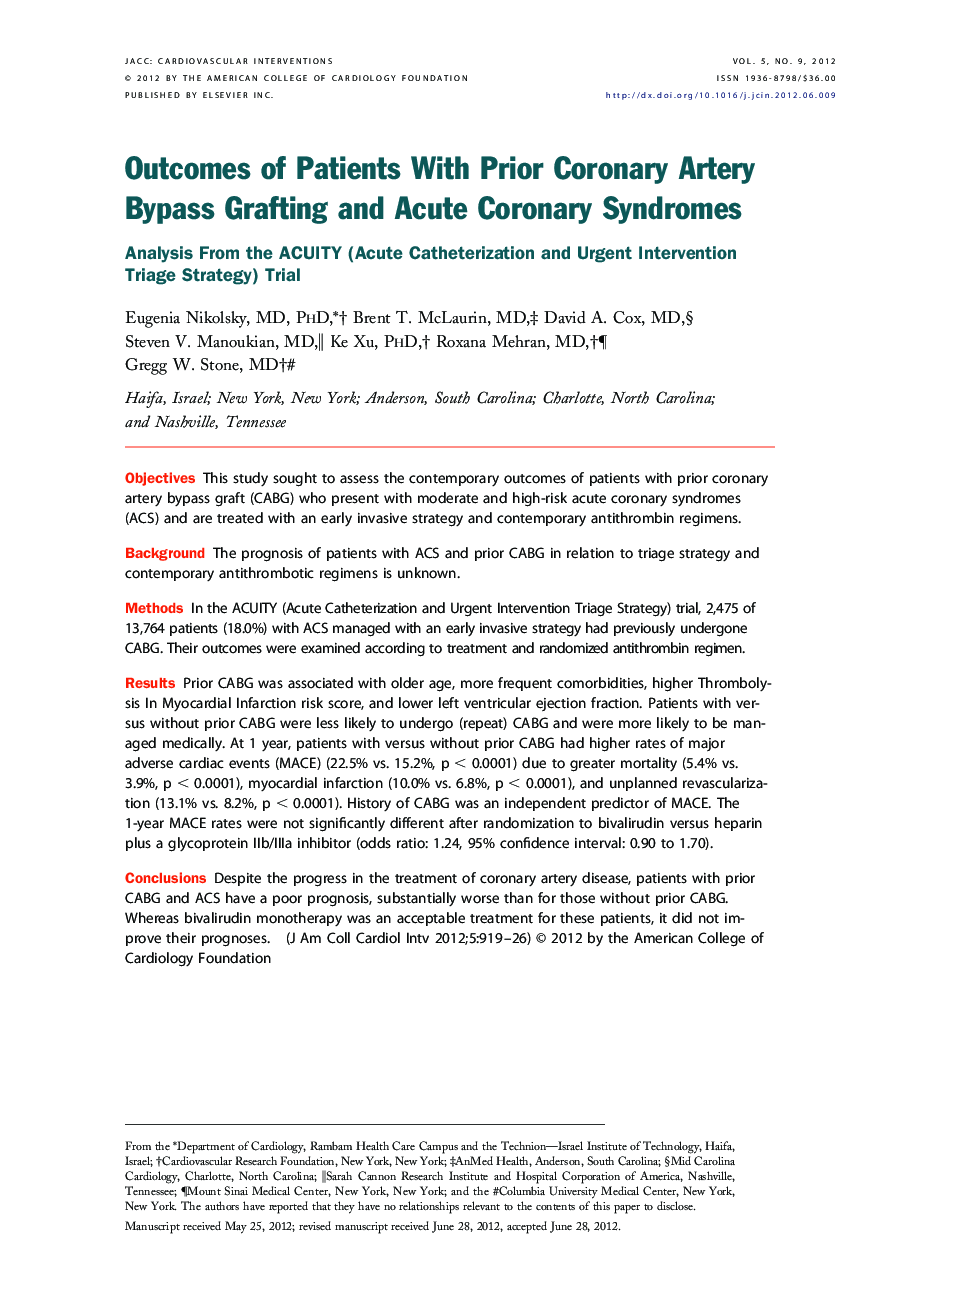 Outcomes of Patients With Prior Coronary Artery Bypass Grafting and Acute Coronary Syndromes : Analysis From the ACUITY (Acute Catheterization and Urgent Intervention Triage Strategy) Trial